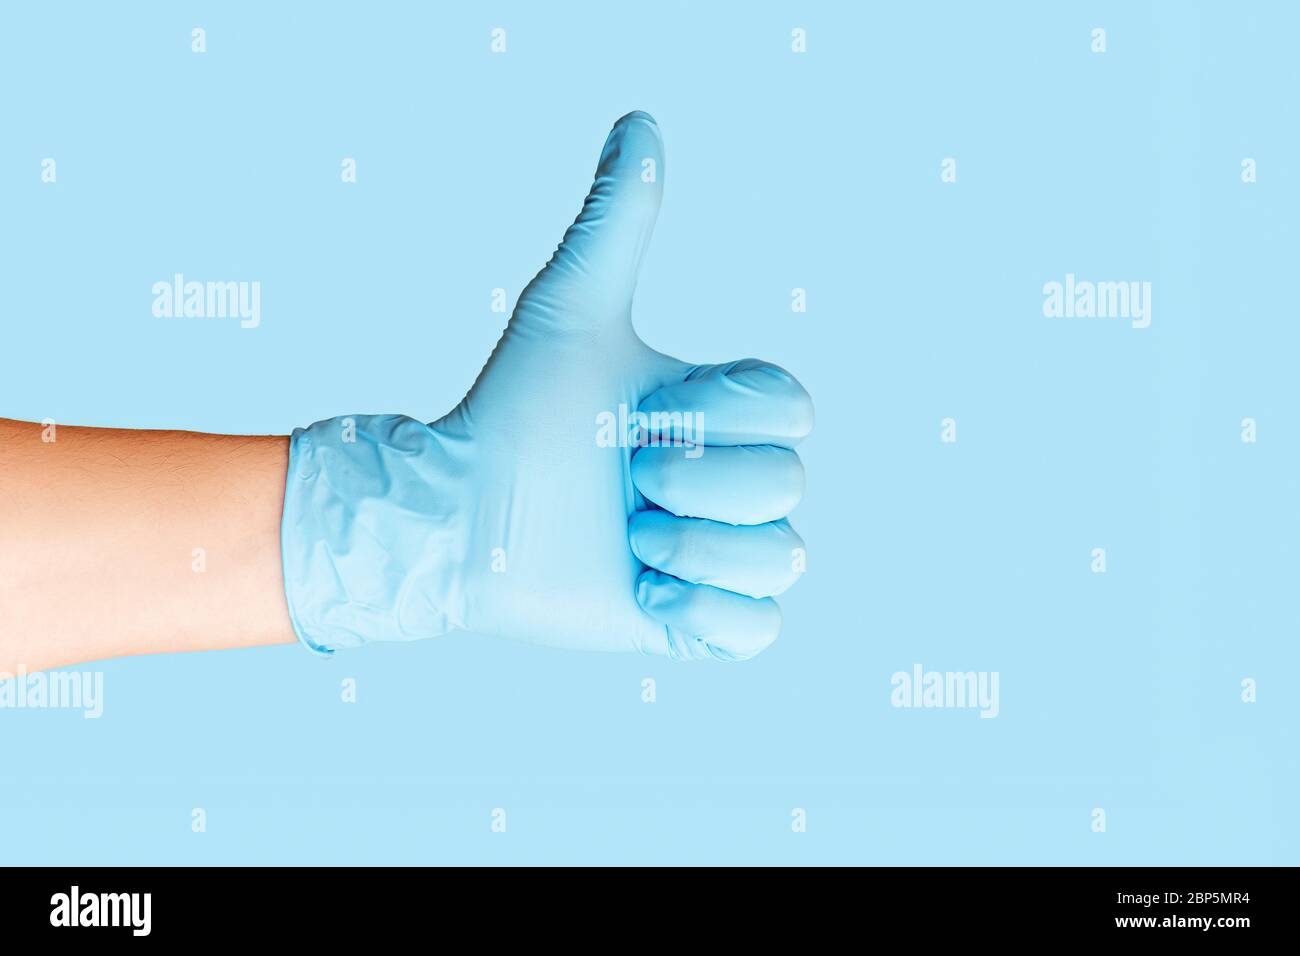 Hand wearing blue latex glove giving thumbs up on blue background. Stock Photo